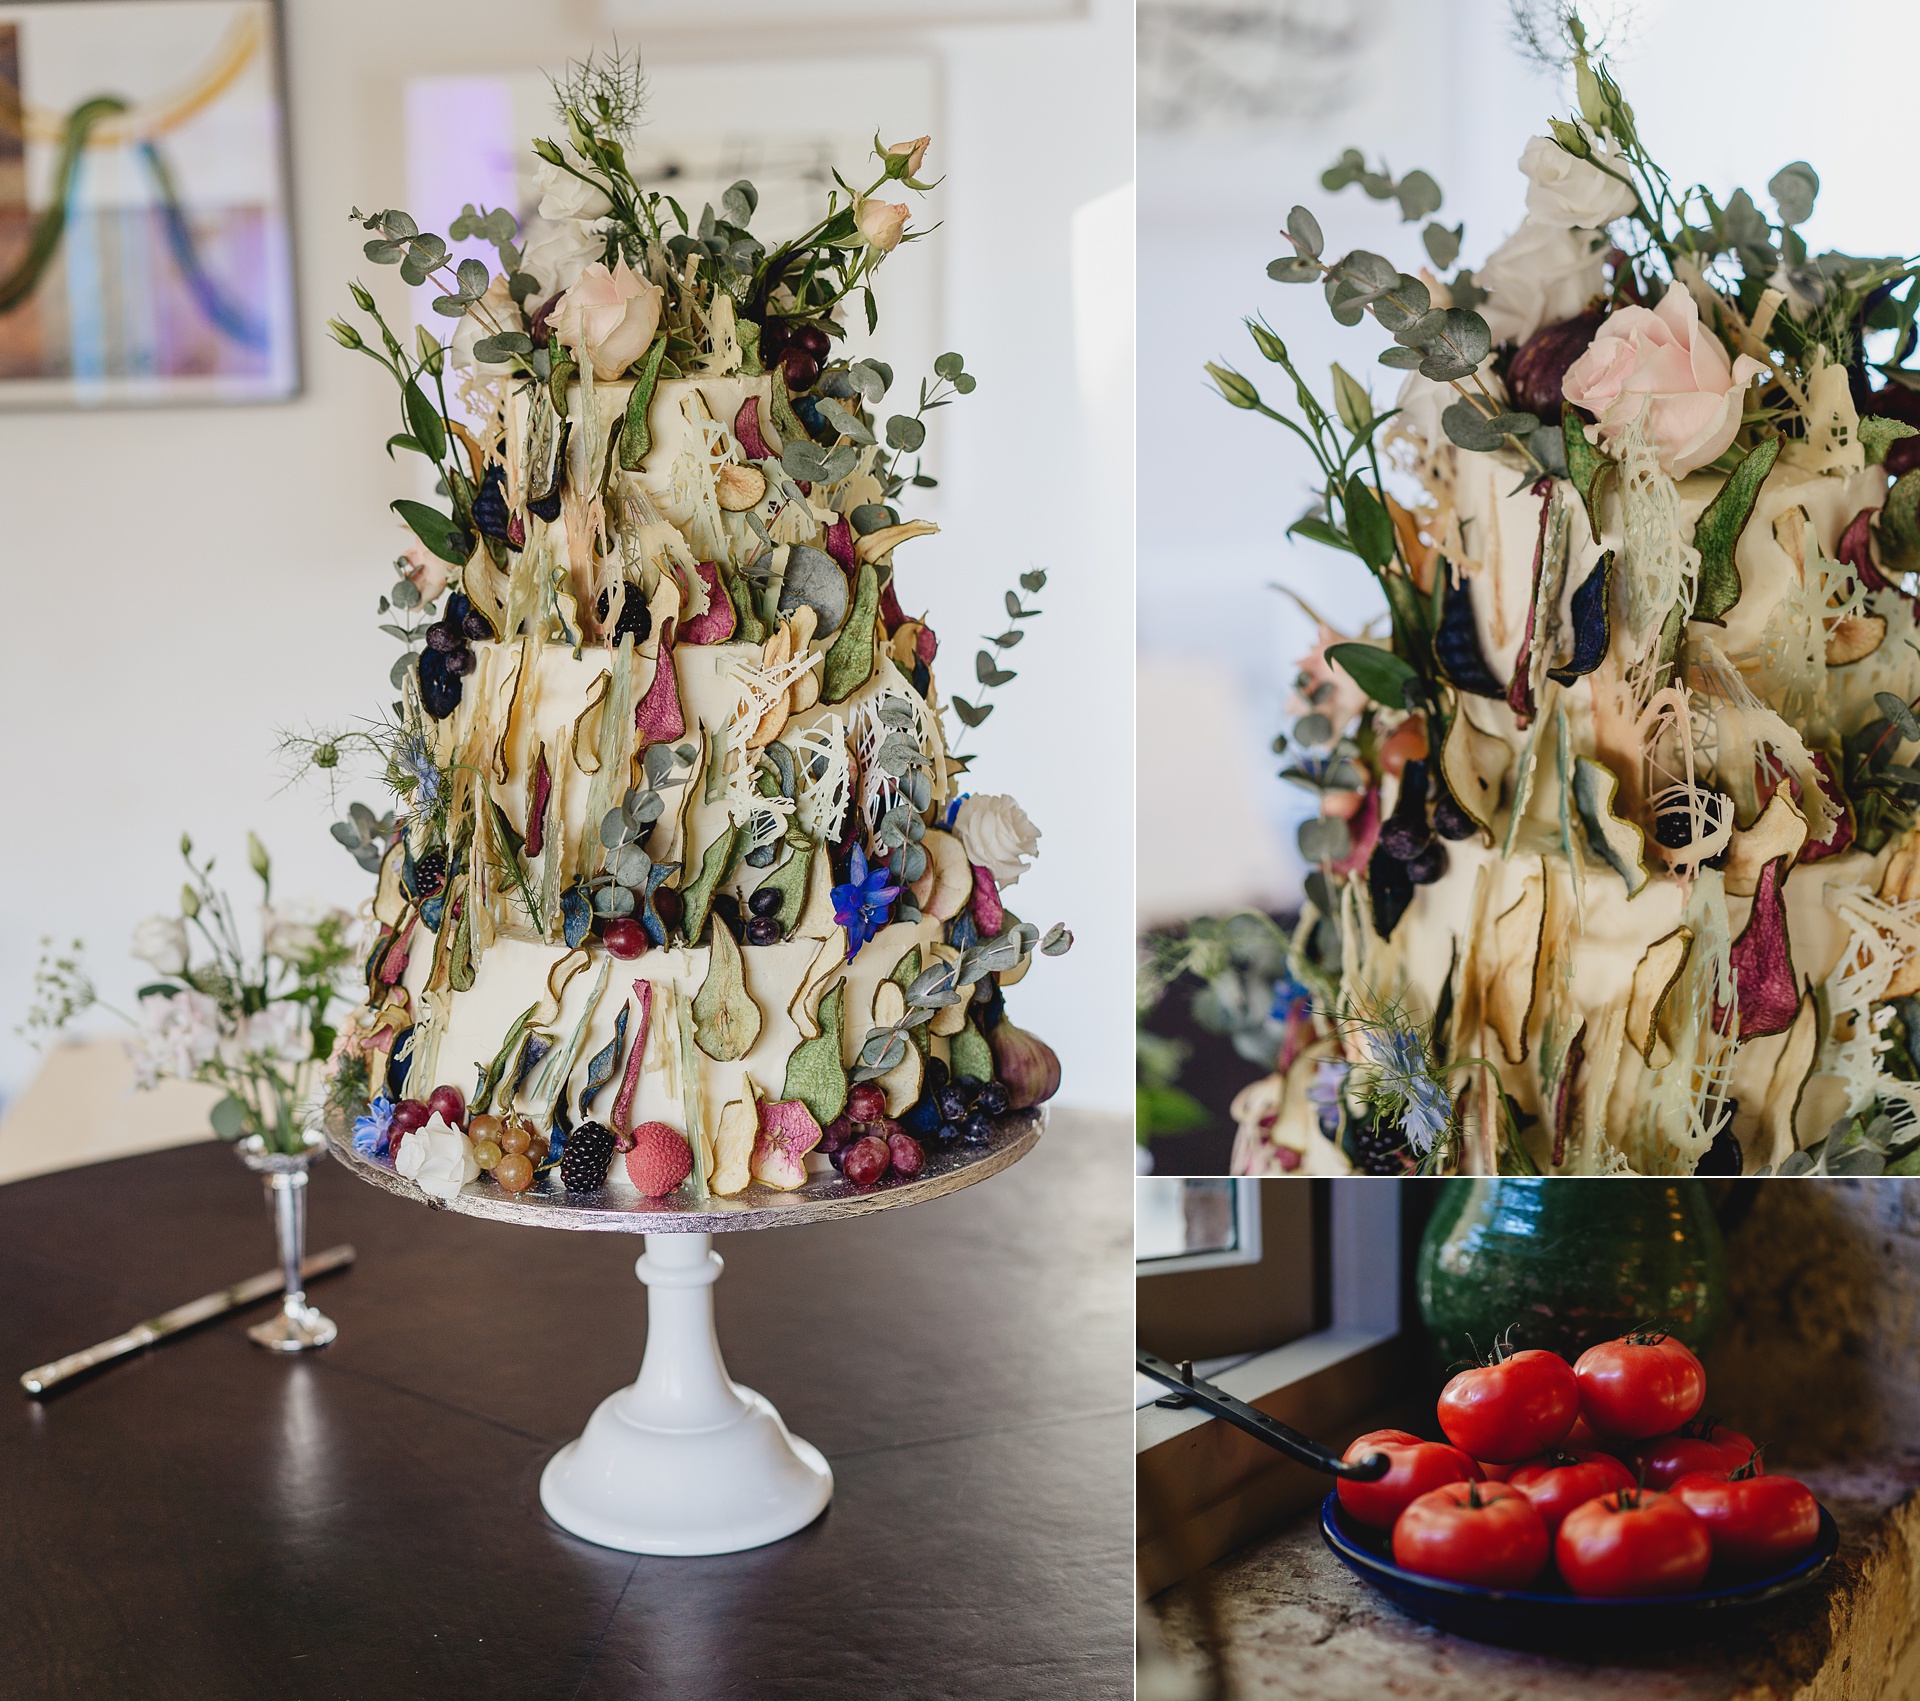 Artistic and unusual wedding cake by The Bakemonger Frome